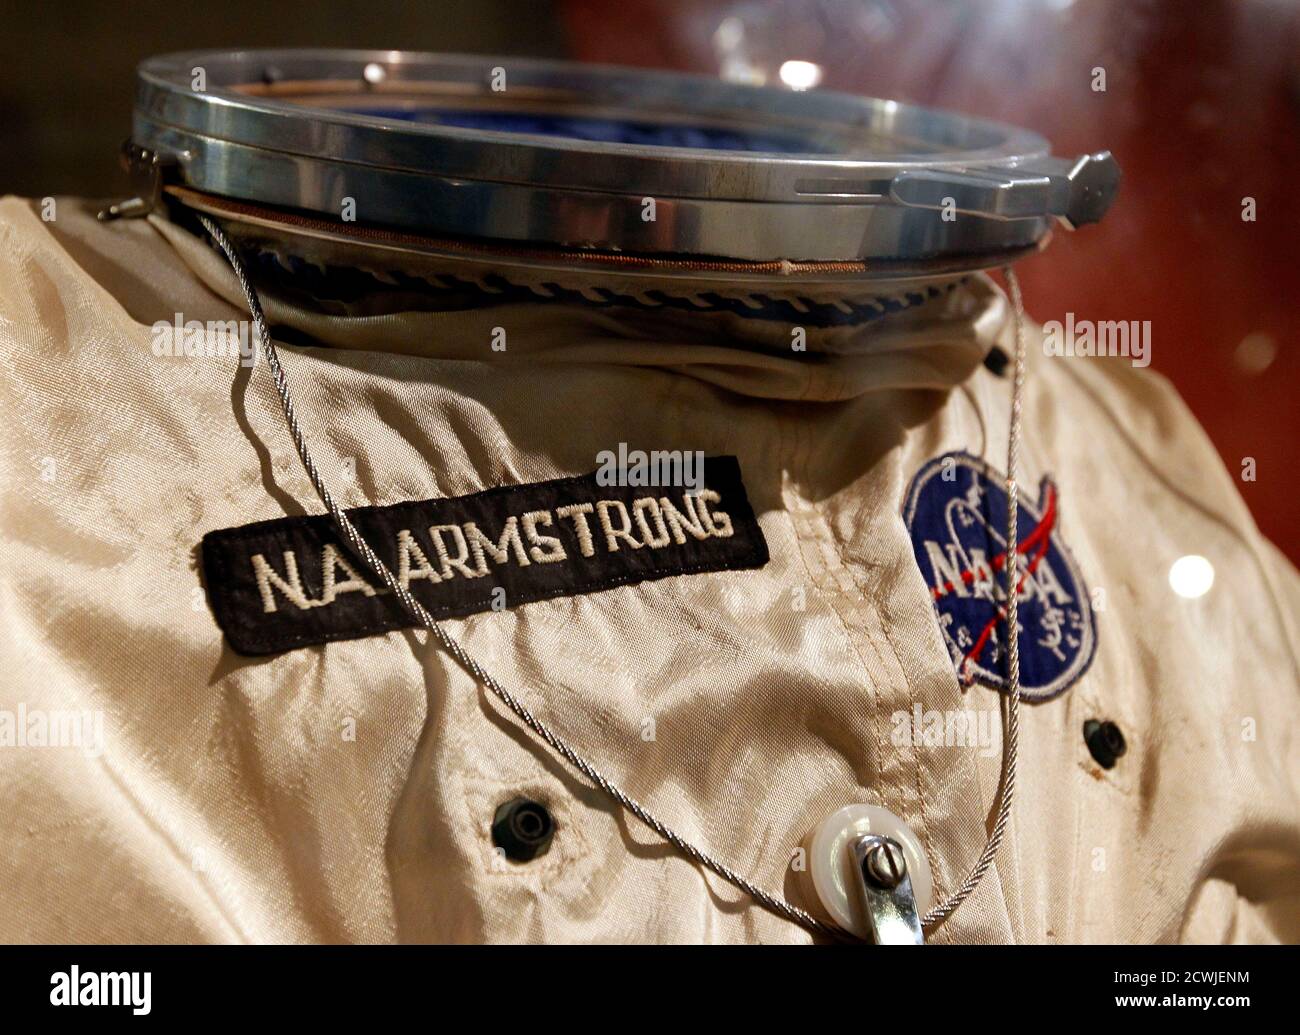 A Gemini VIII spacesuit on display is pictured at the Armstrong Air and Space Museum in Wapakoneta, Ohio August 29, 2012.  Armstrong, who took a giant leap for mankind when he became the first person to walk on the moon, has died at the age of 82, his family said on Saturday.  REUTERS/Matt Sullivan  (UNITED STATES - Tags: SCIENCE TECHNOLOGY OBITUARY) Stock Photo